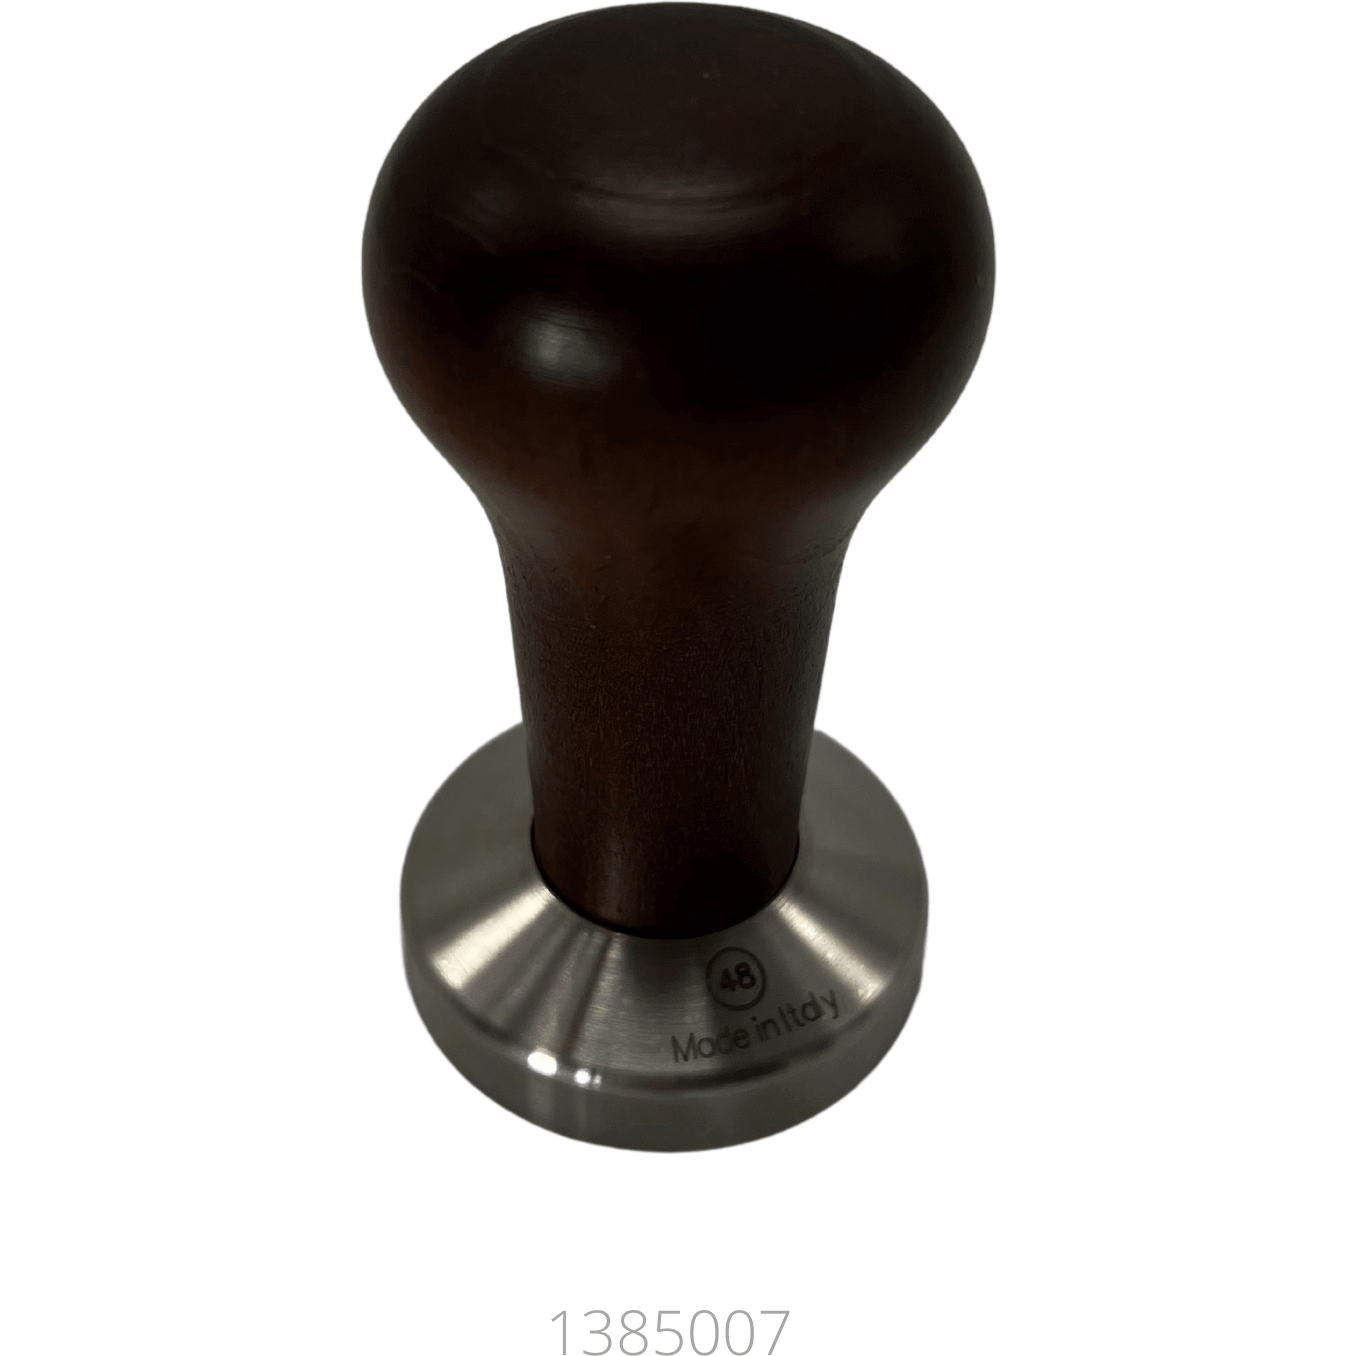 Motta Wooden/Stainless Steel Precision Tamper 53mm - {{ Espresso_Connect }}